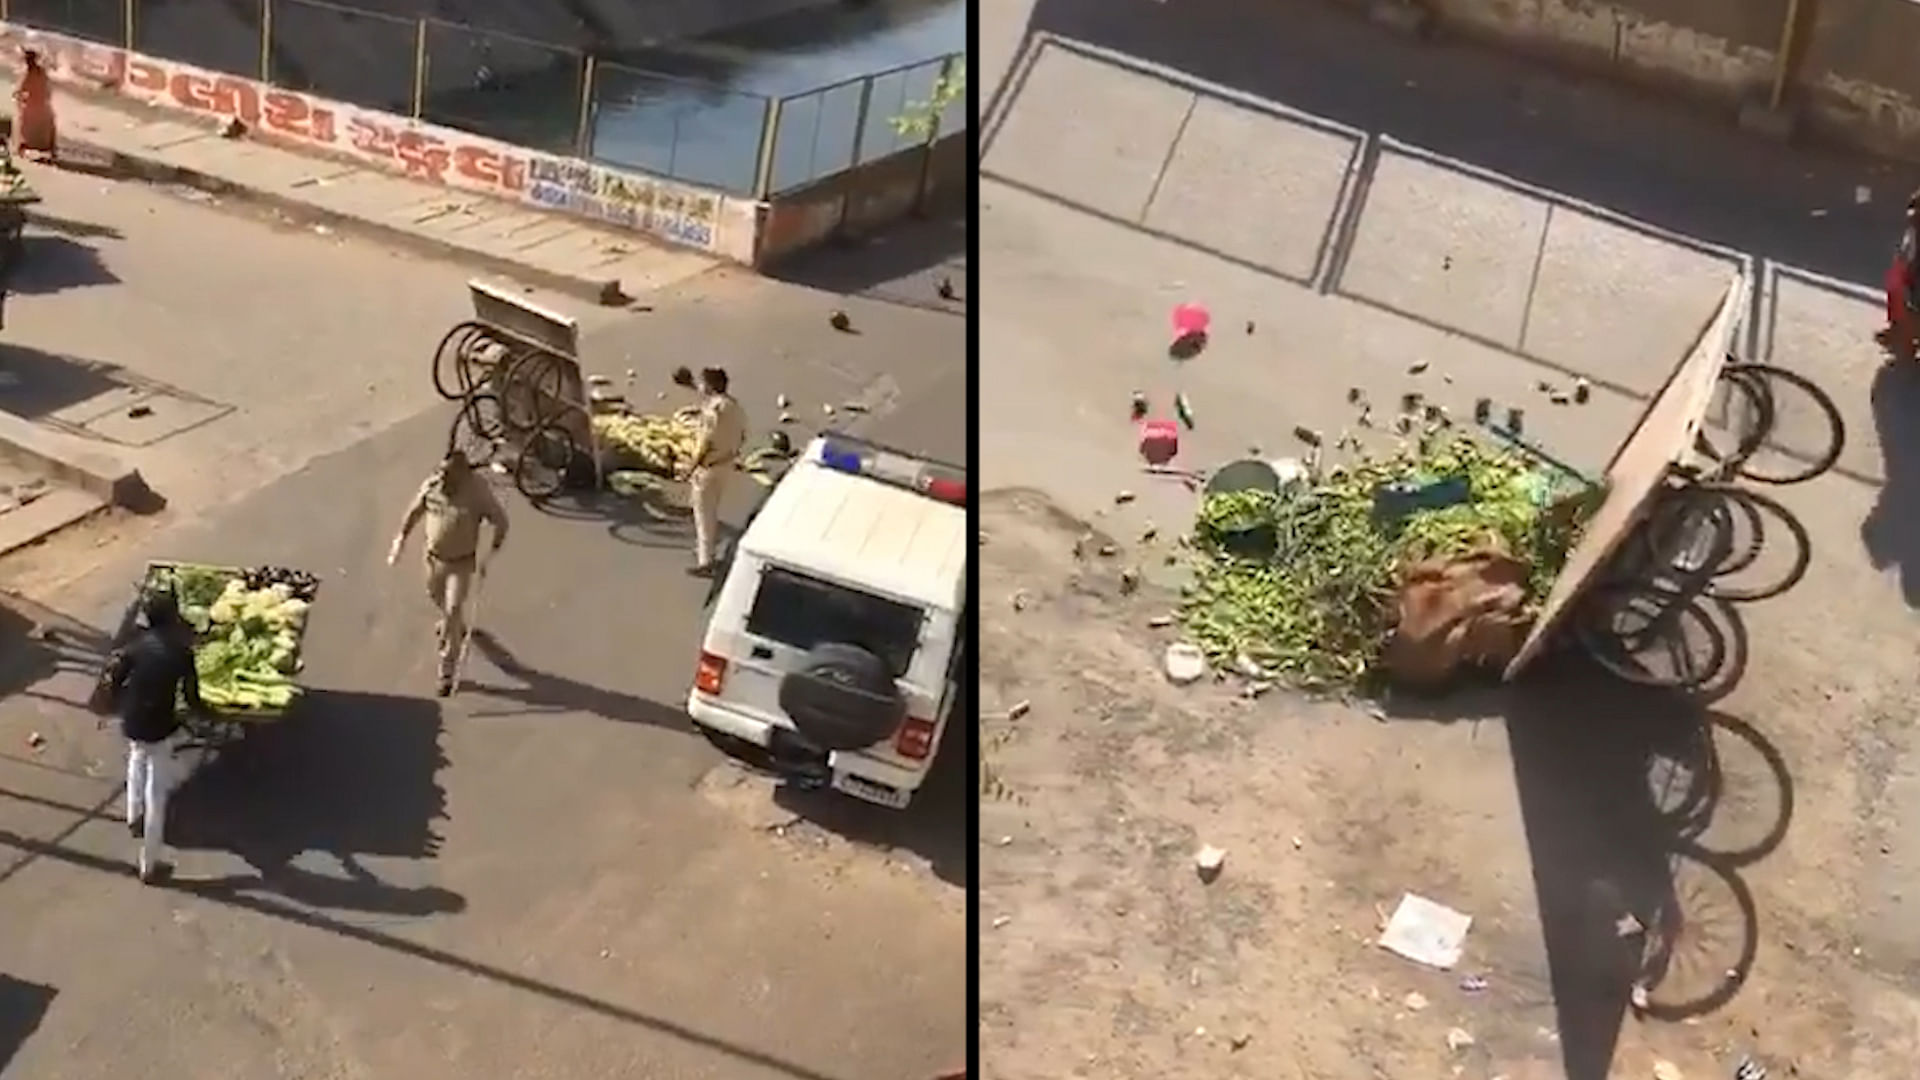 Ahmedabad policemen are seen toppling vegetable carts to enforce lockdown in the city. Police inspector Vishnu Choudhry and other policemen have been suspended by DGP Gujarat.